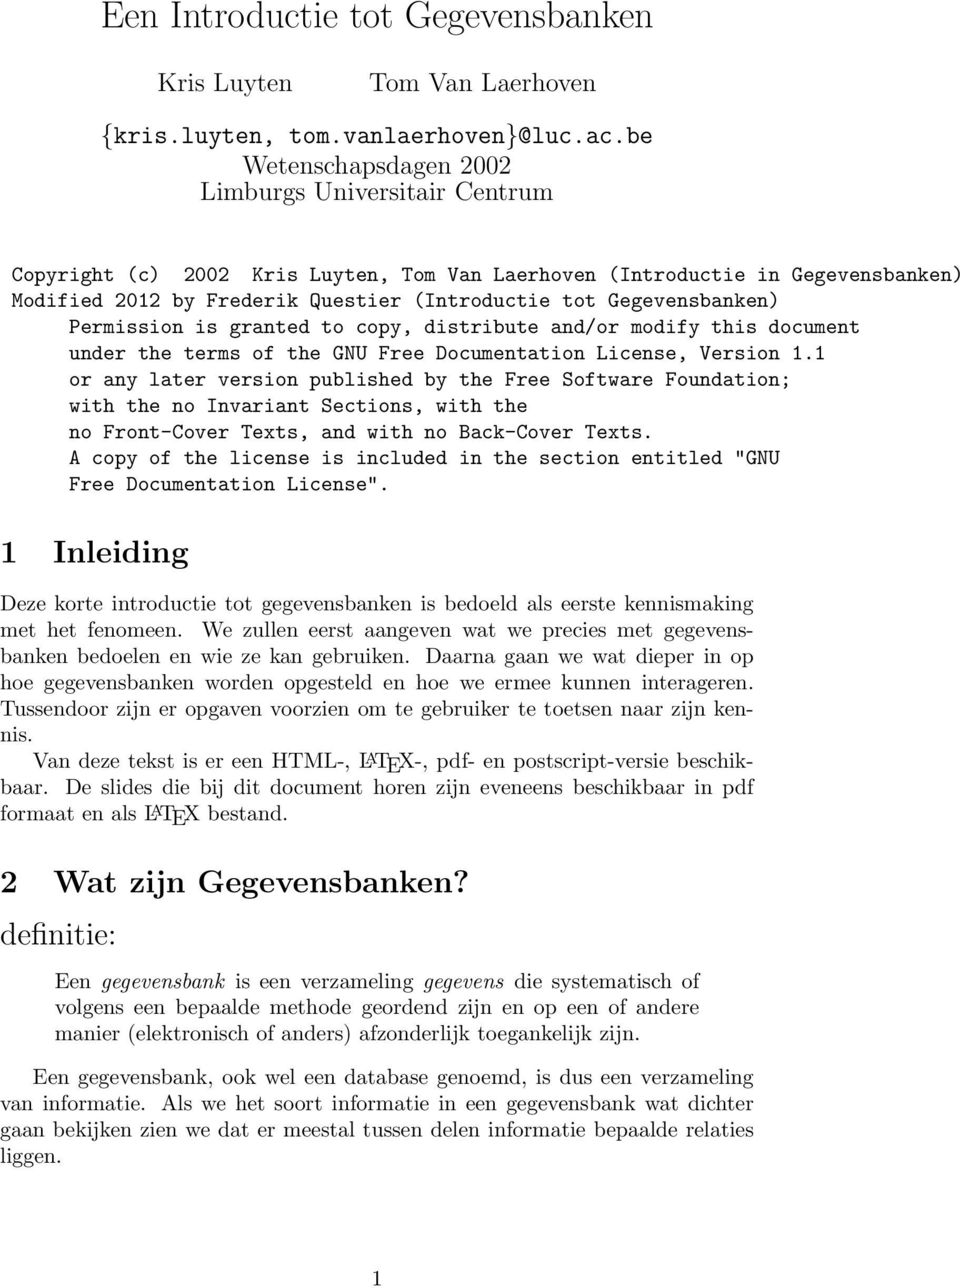 Gegevensbanken) Permission is granted to copy, distribute and/or modify this document under the terms of the GNU Free Documentation License, Version 1.